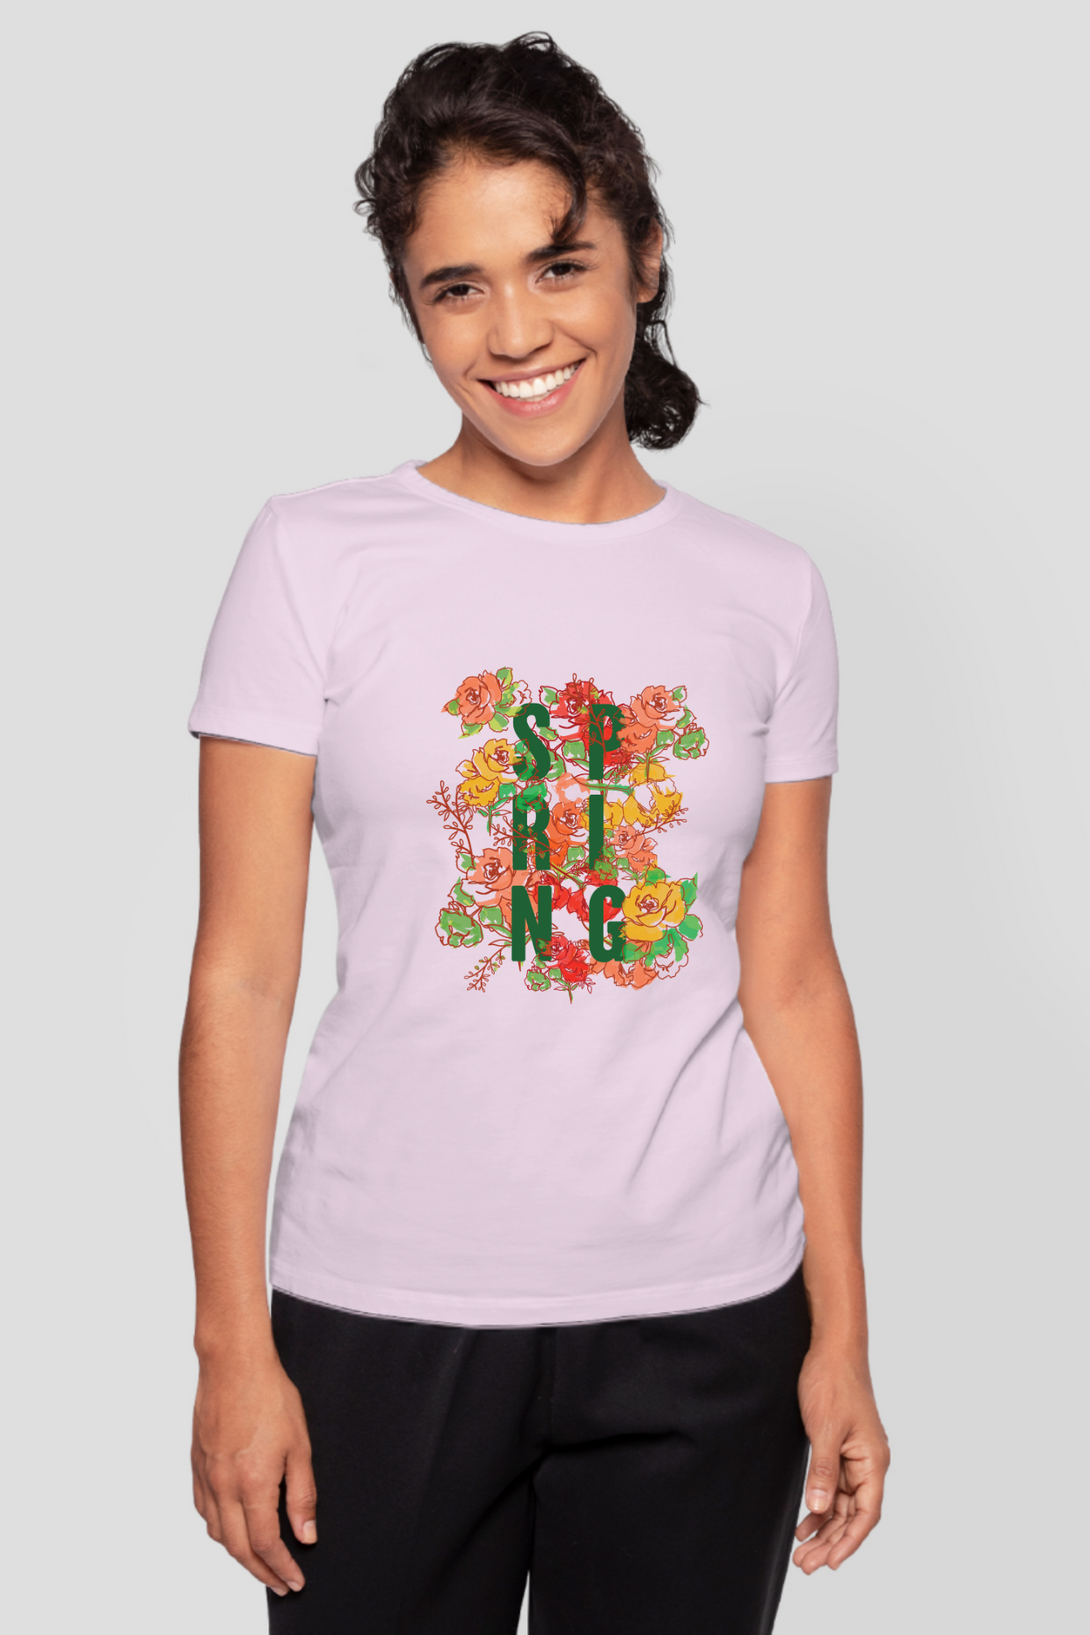 Spring Vibes Printed T-Shirt For Women - WowWaves - 13